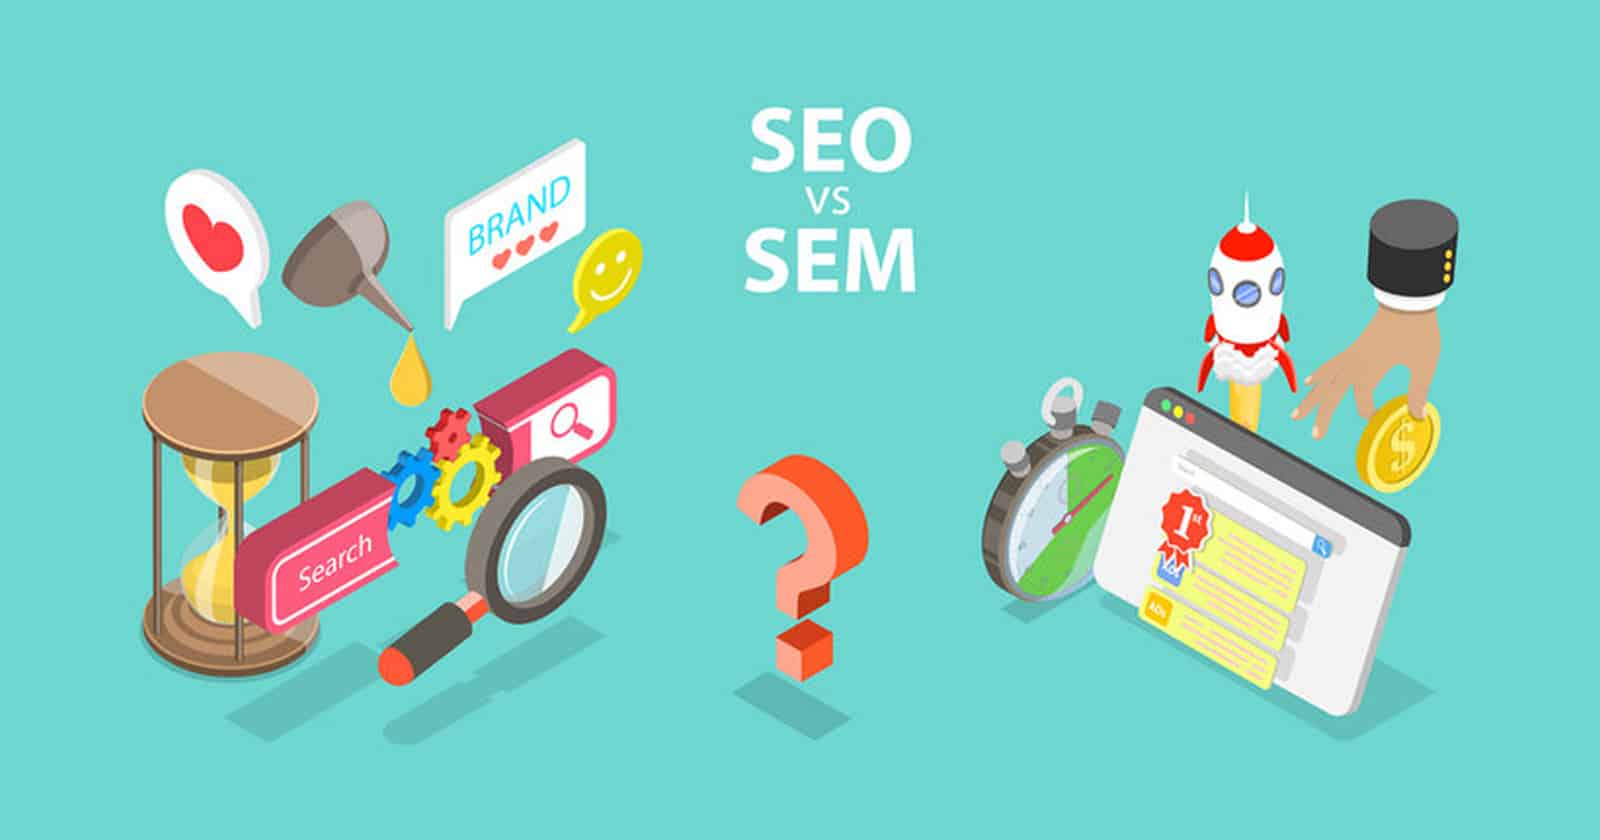 SEO Vs SEM: What’s the Difference